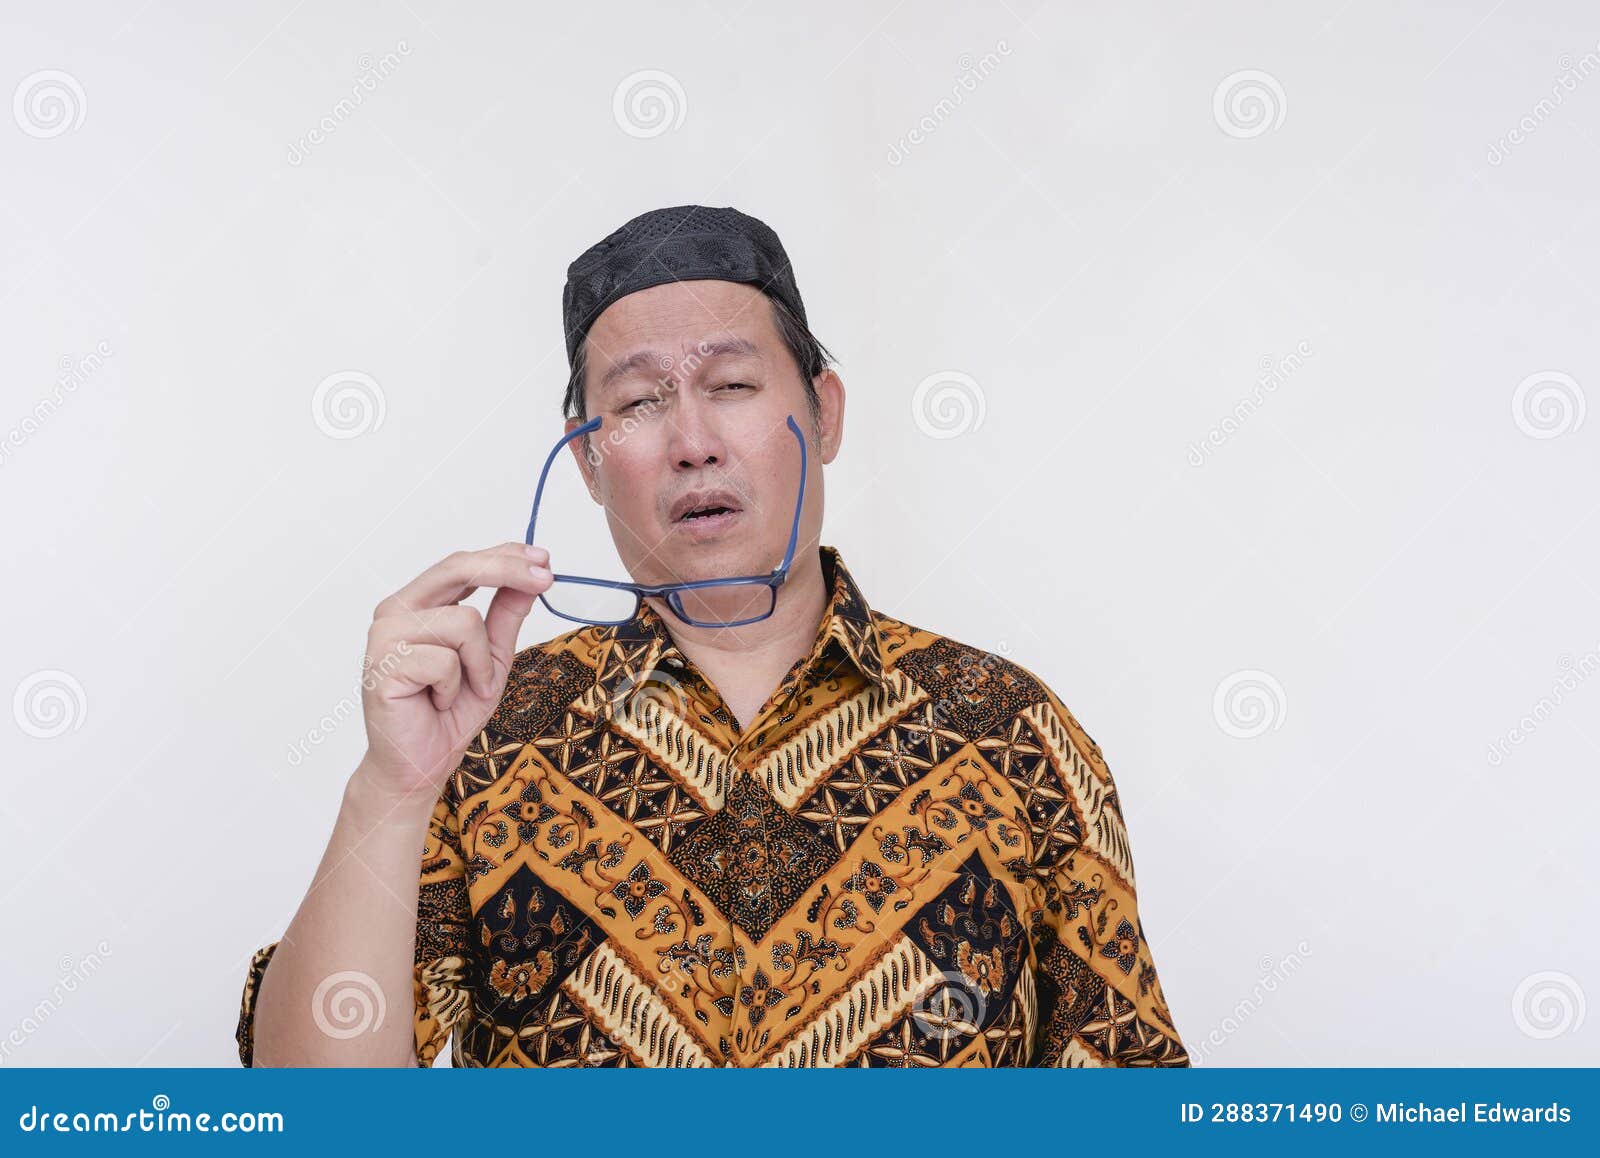 a groggy and stressed middle aged man takes off his glasses after feeling eyestrain. an overworked person wearing a batik shirt